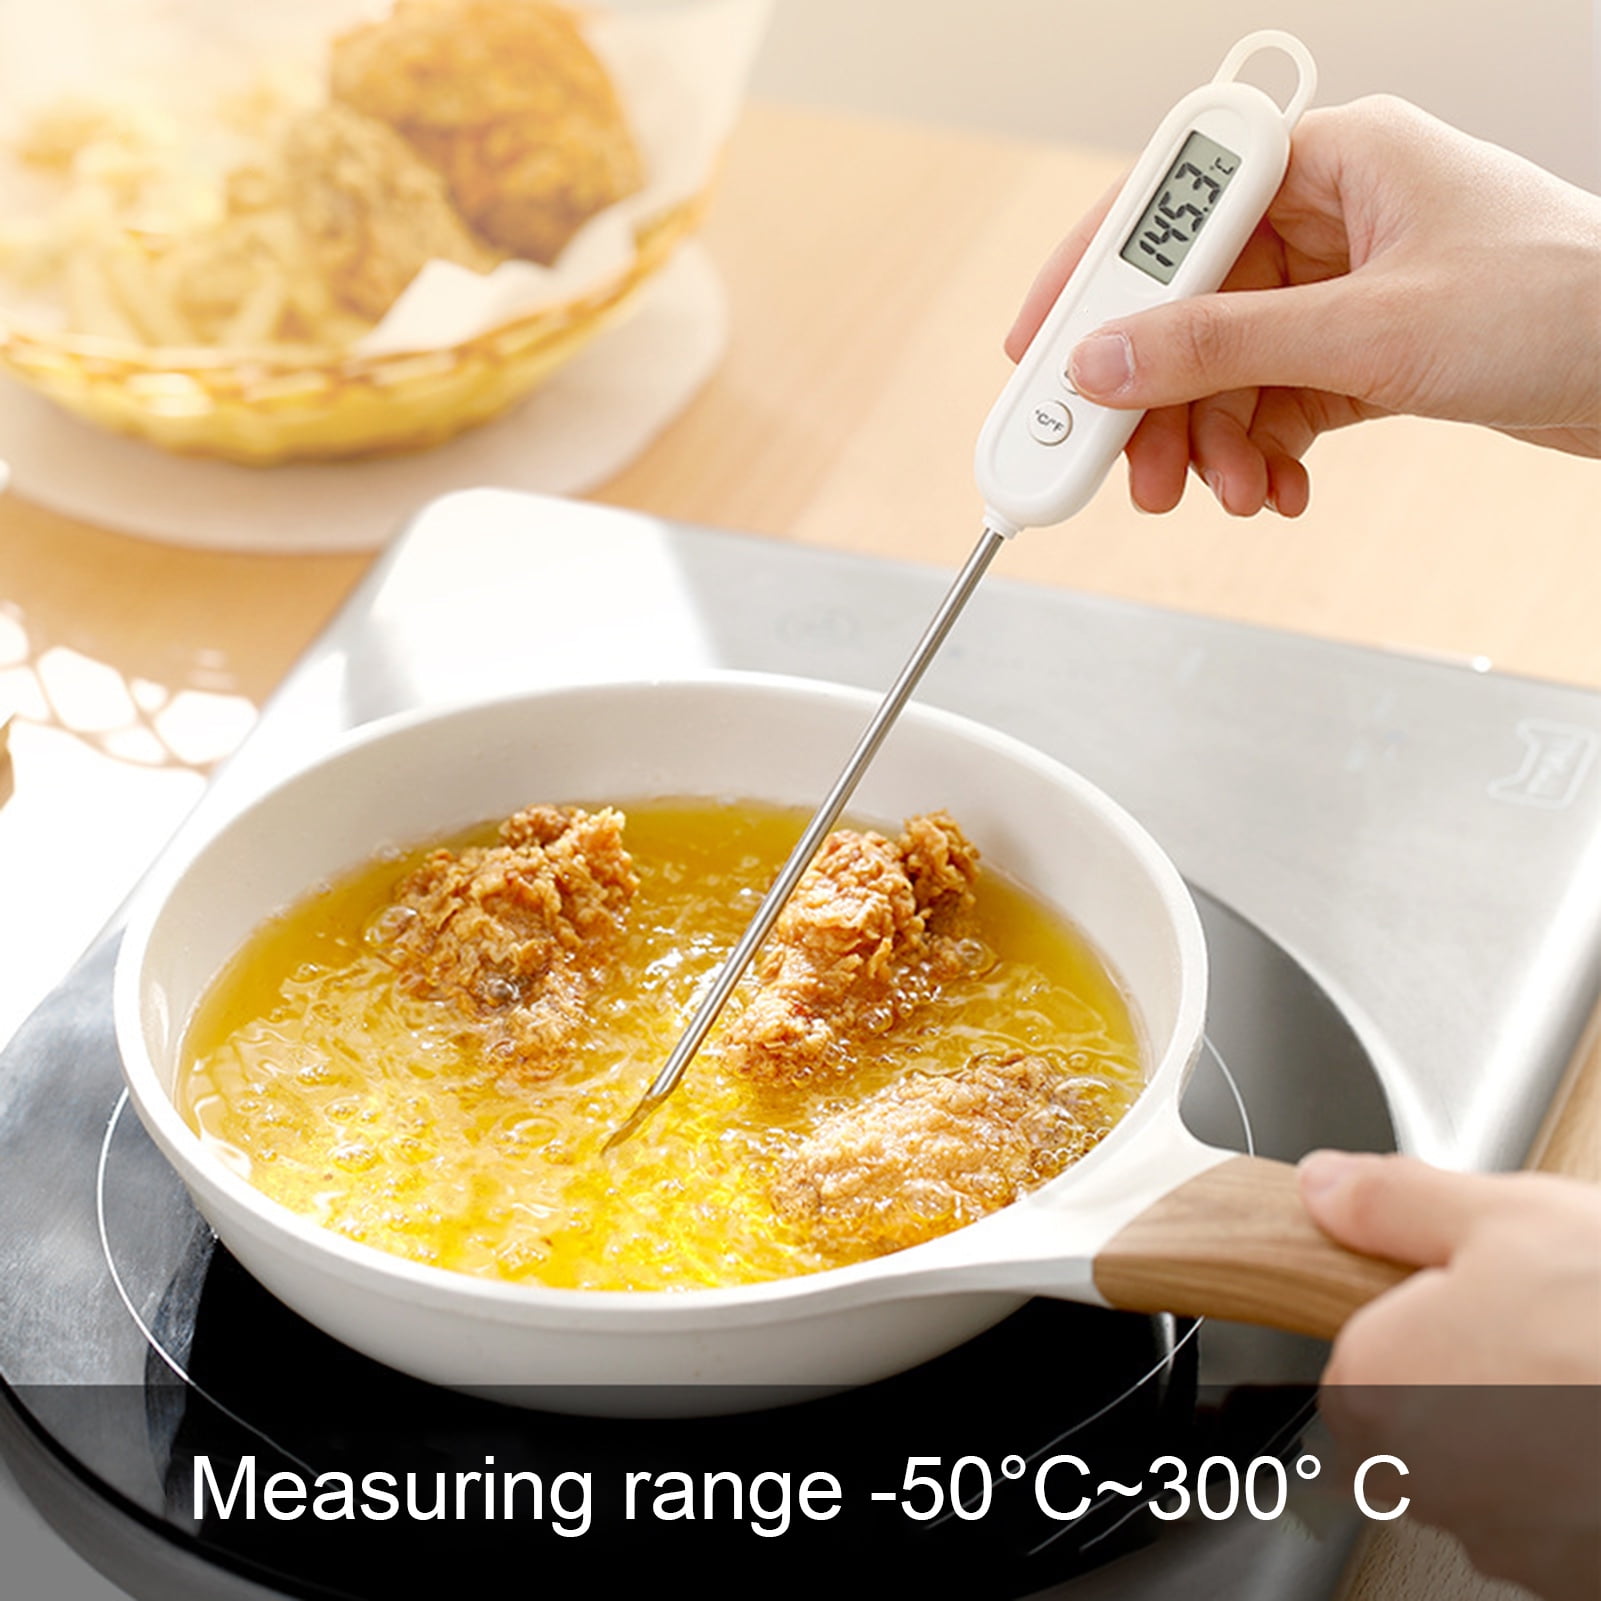 FNCF Auto LCD digitales Clip Thermometer Uhr